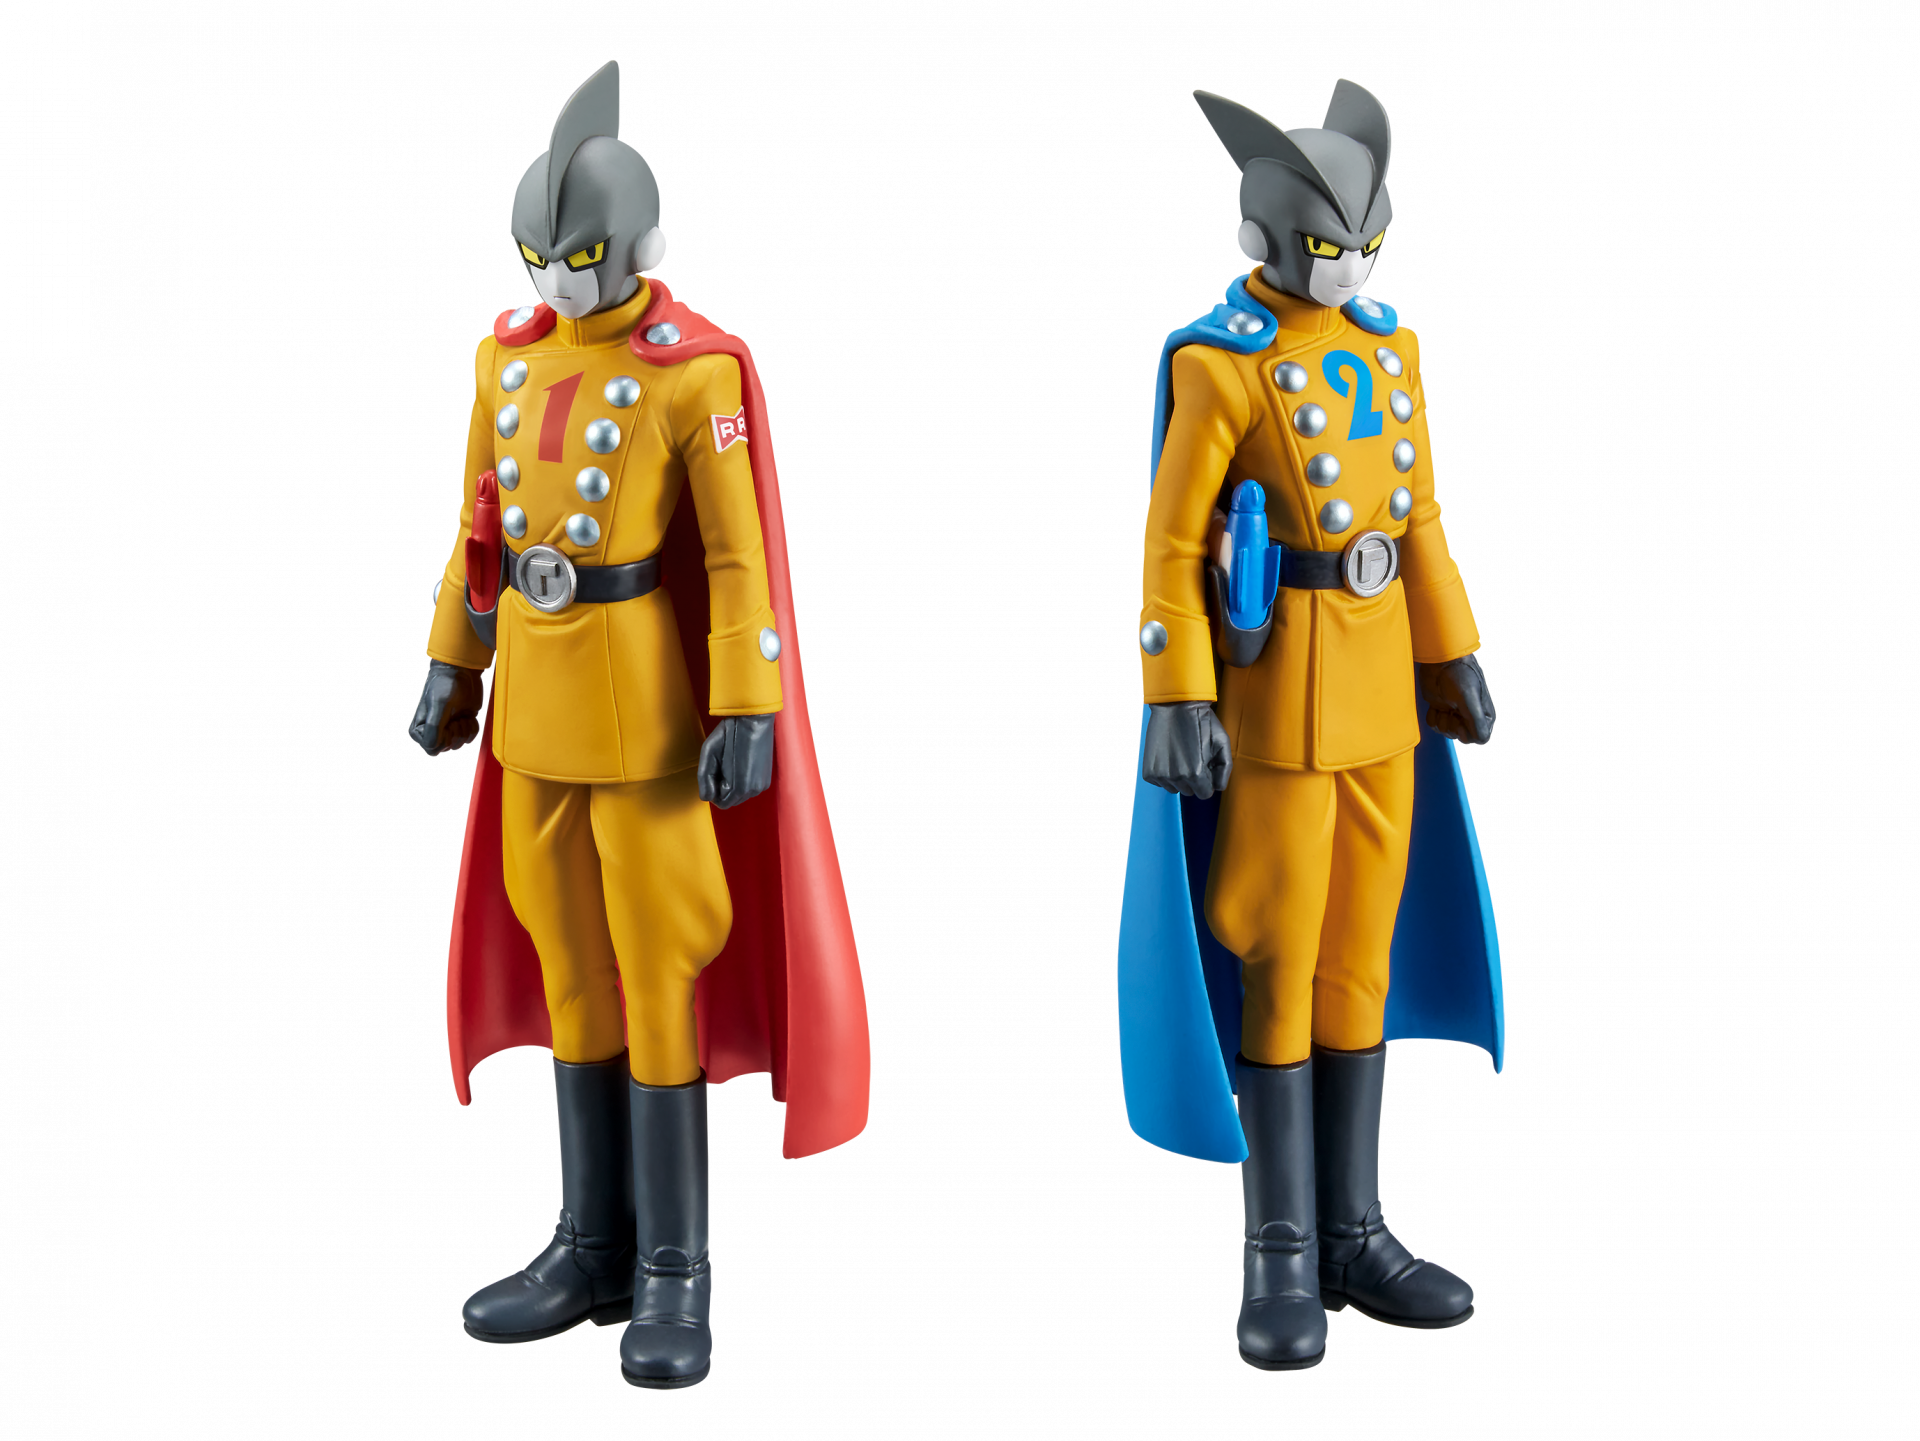 Dragon Ball Super: SUPER HERO Movie Characters Coming Soon to Crane Games!